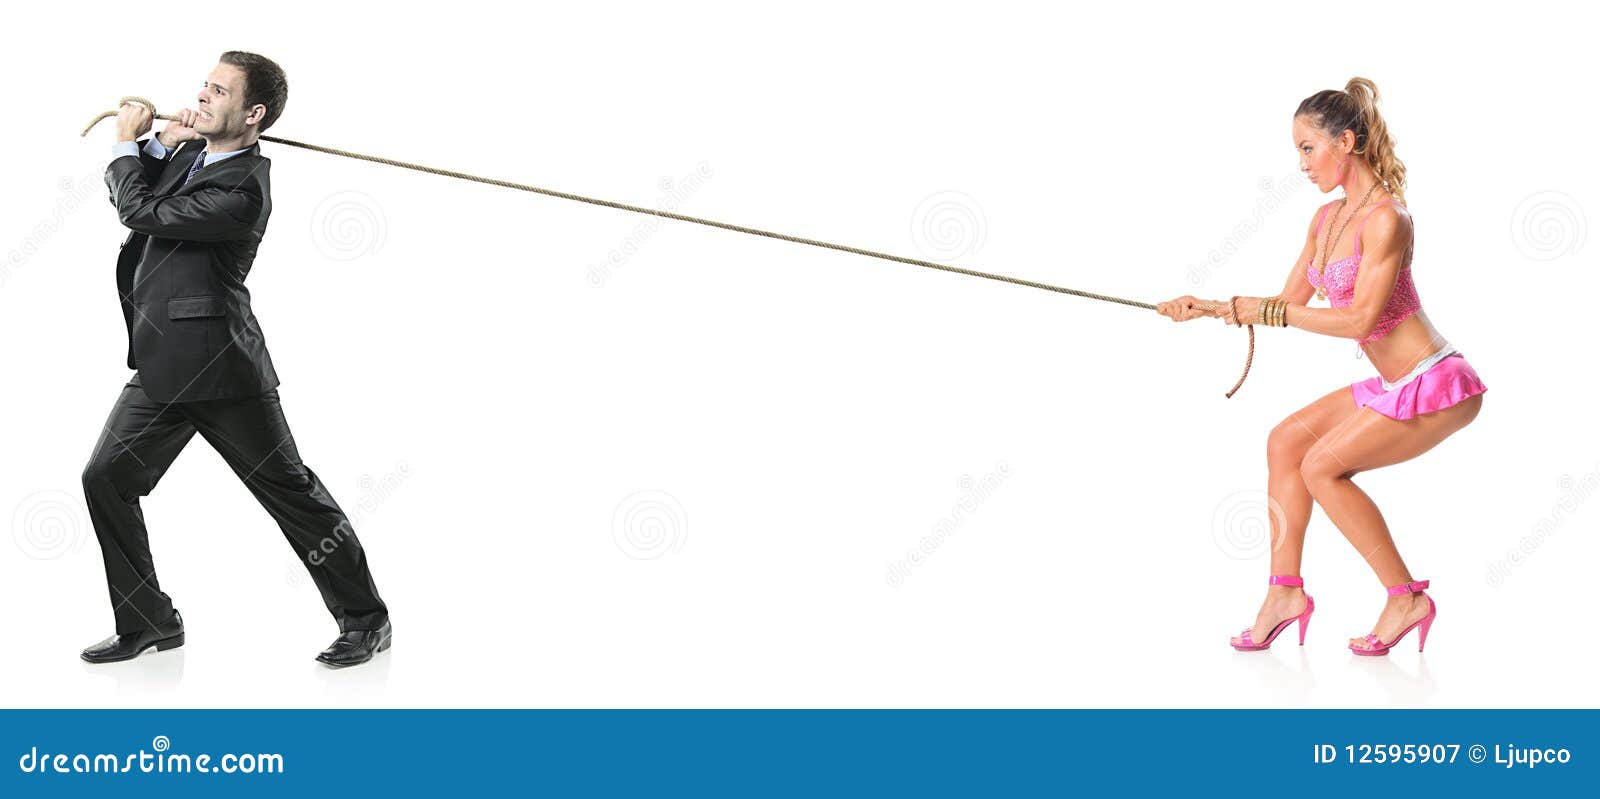 clipart man pulling rope - photo #48